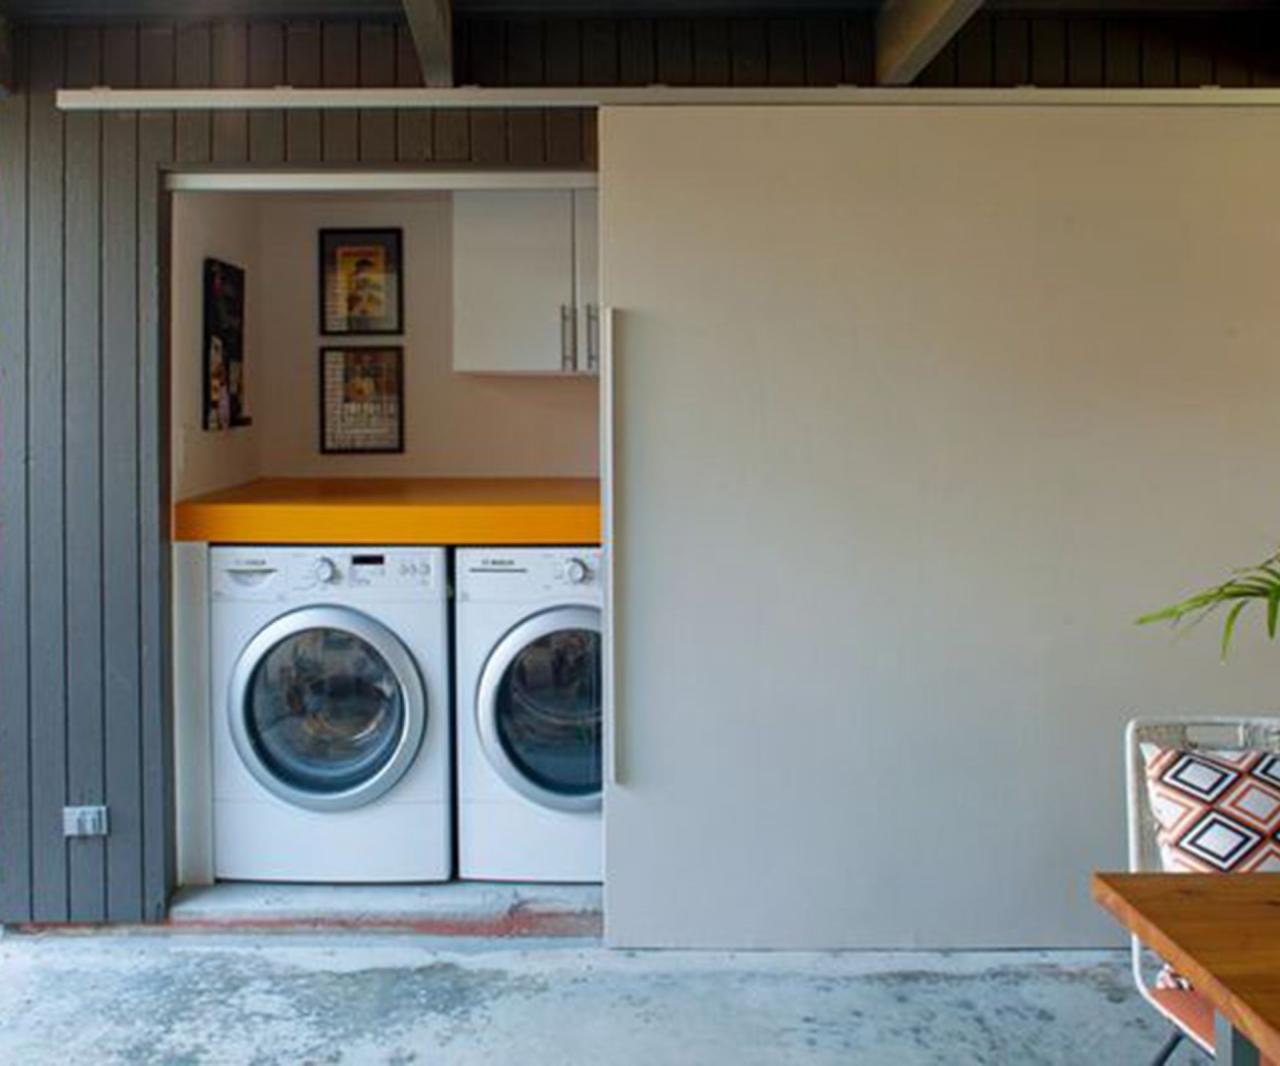 11 clever ideas for laundries Your Home and Garden Laundry cupboard